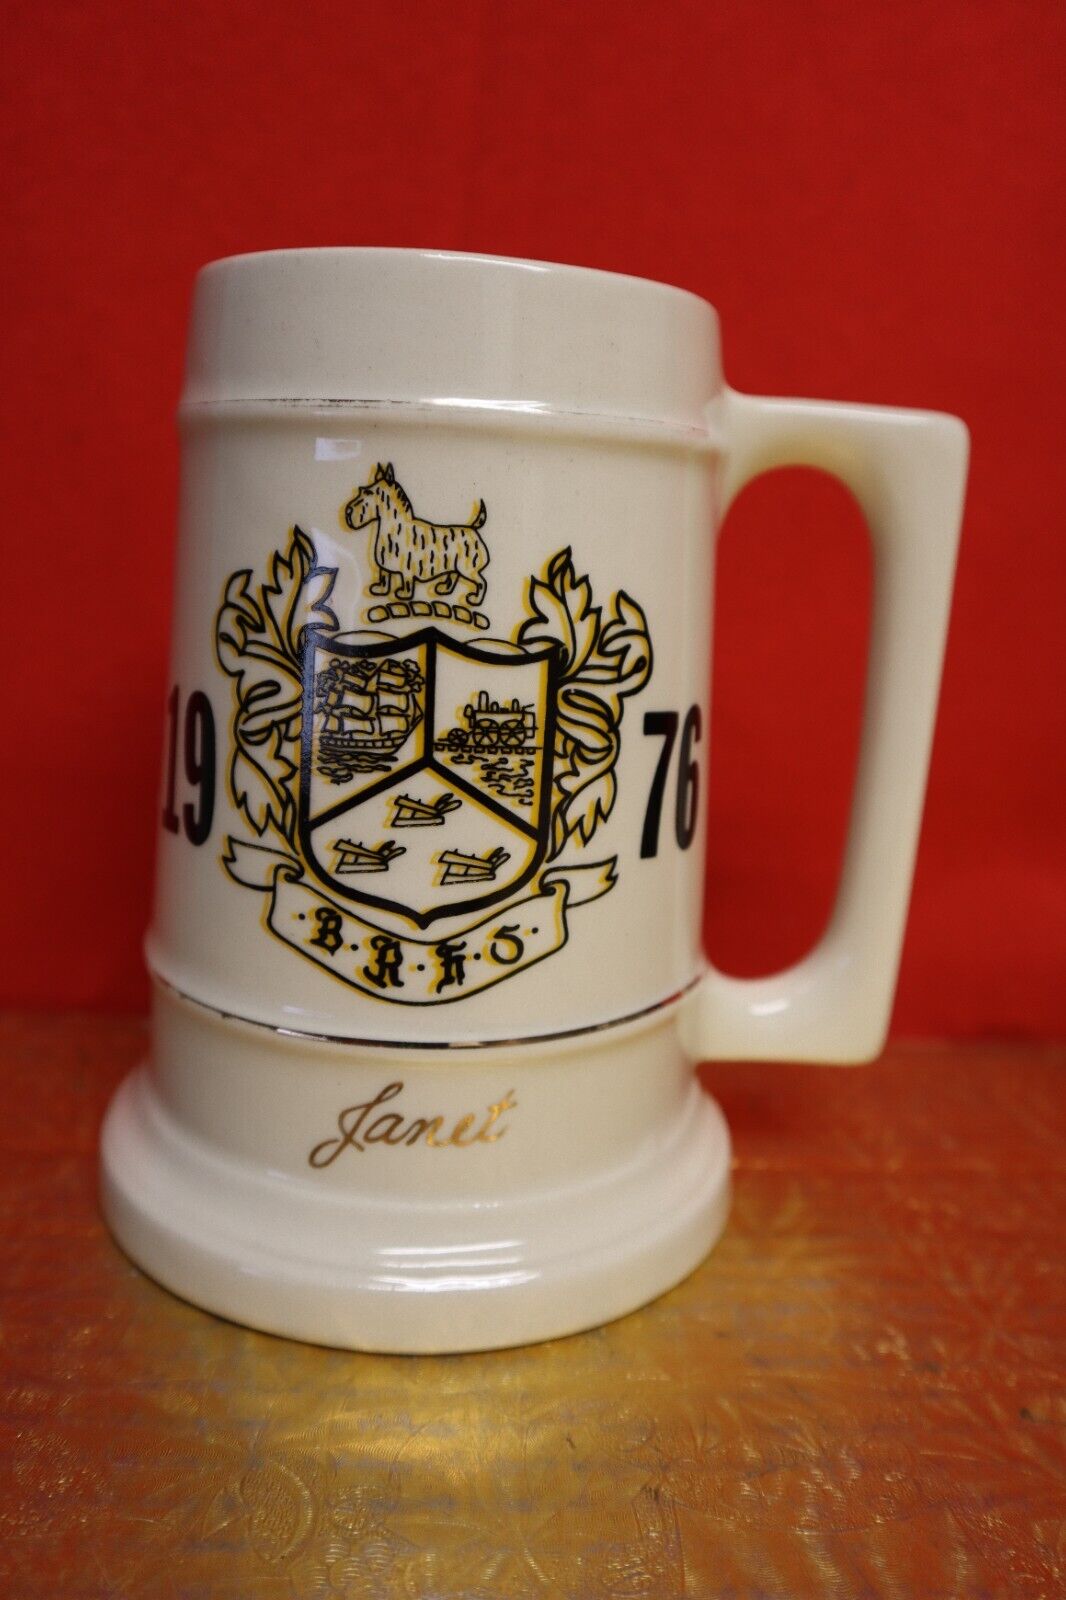 1976 Janet Air Force Beer Stein Mug The Spirit Of Seventy-Six Military. A129